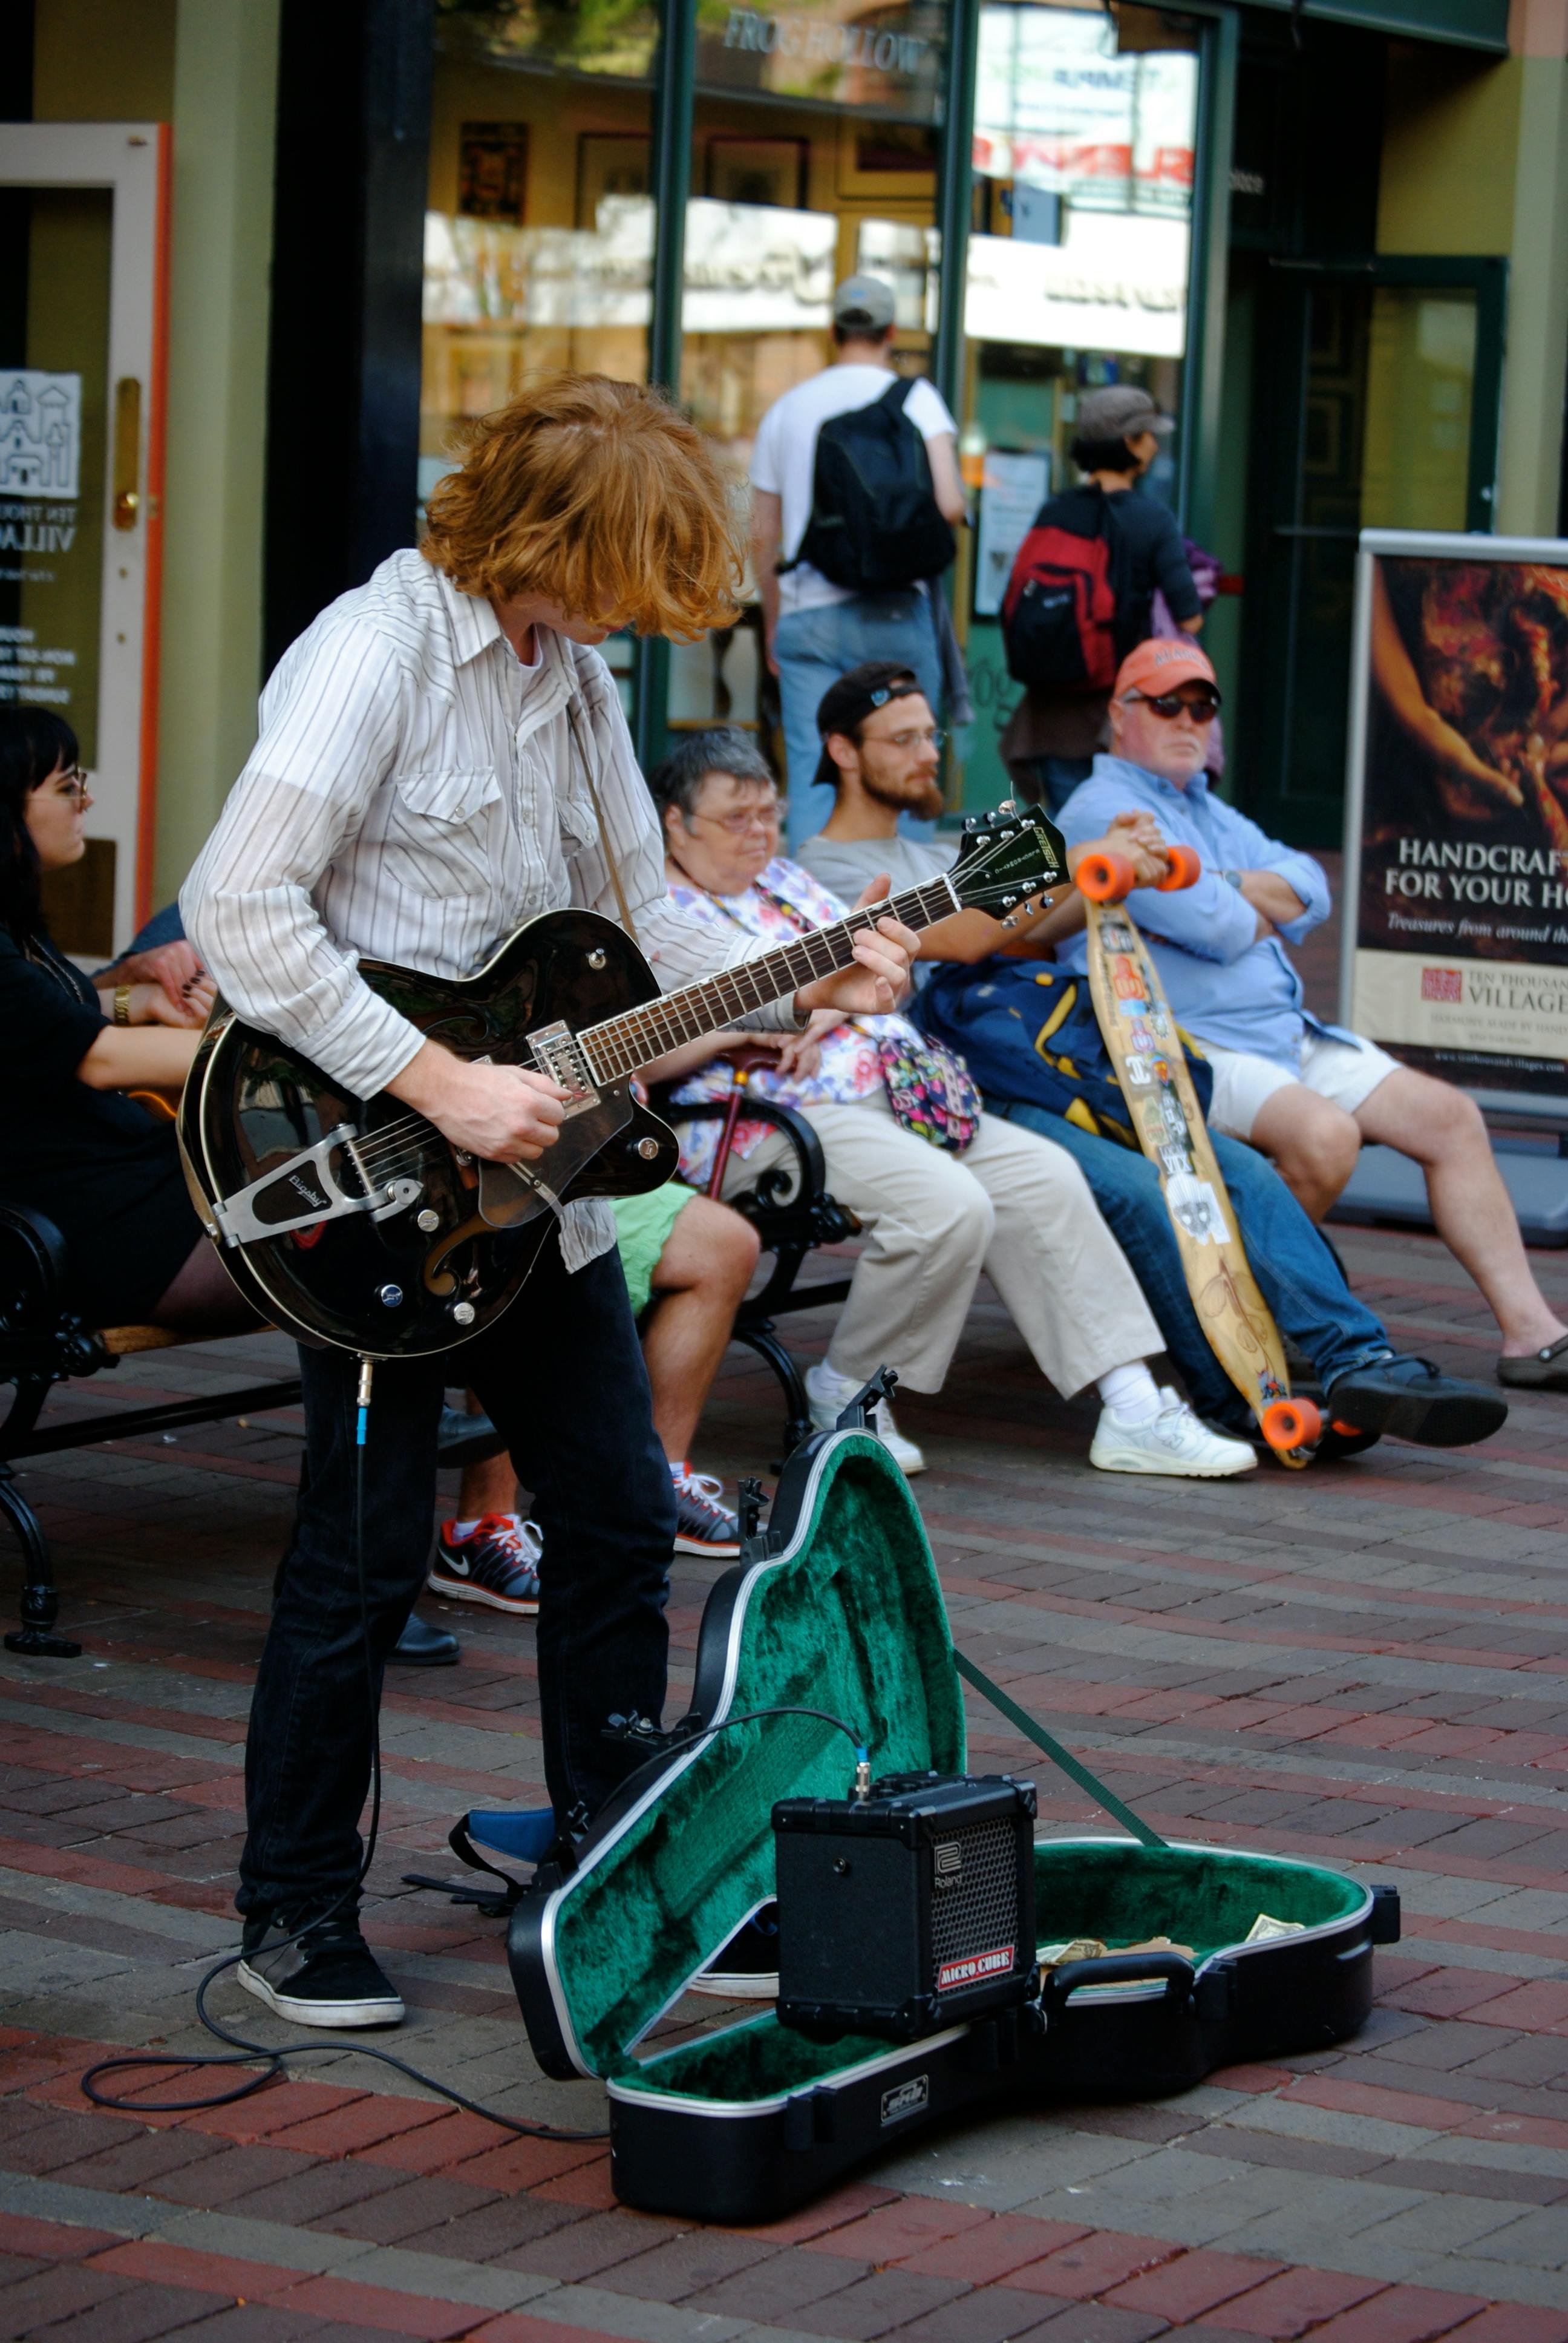 anonymous guitarist performing song on city street